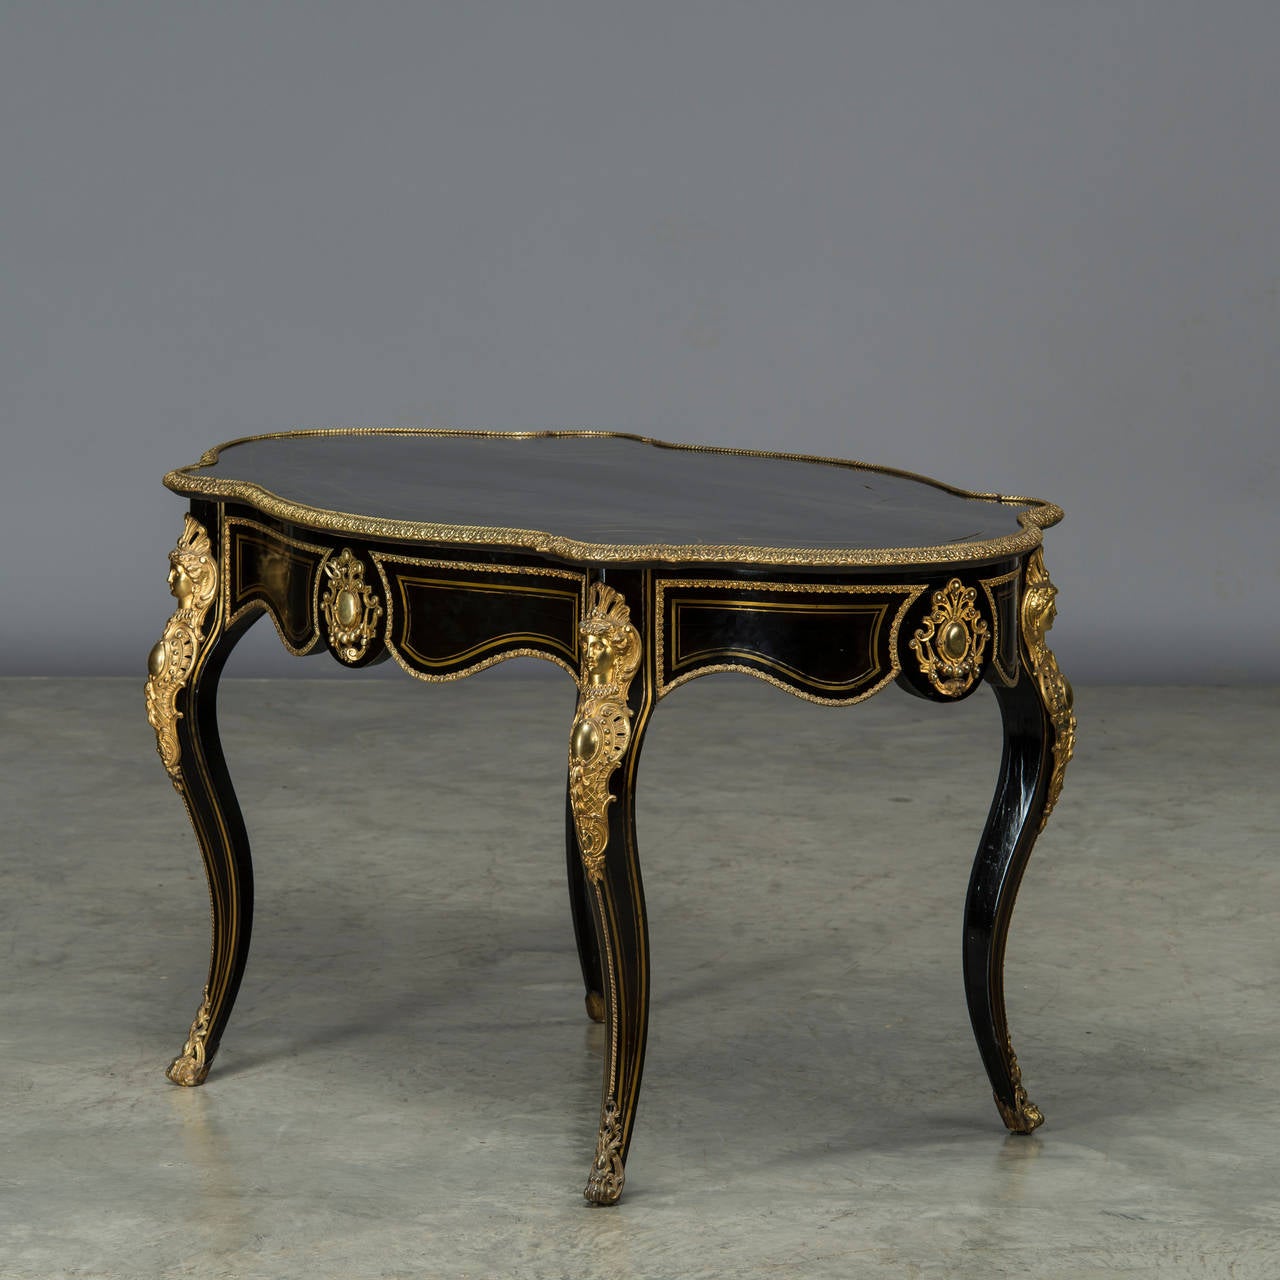 Napoleon III table in ebonized wood with ebony and gilded bronze mountings and brass inlays. One large drawer.
Crafted with high craftsmanship. 

France, 1850-1870.